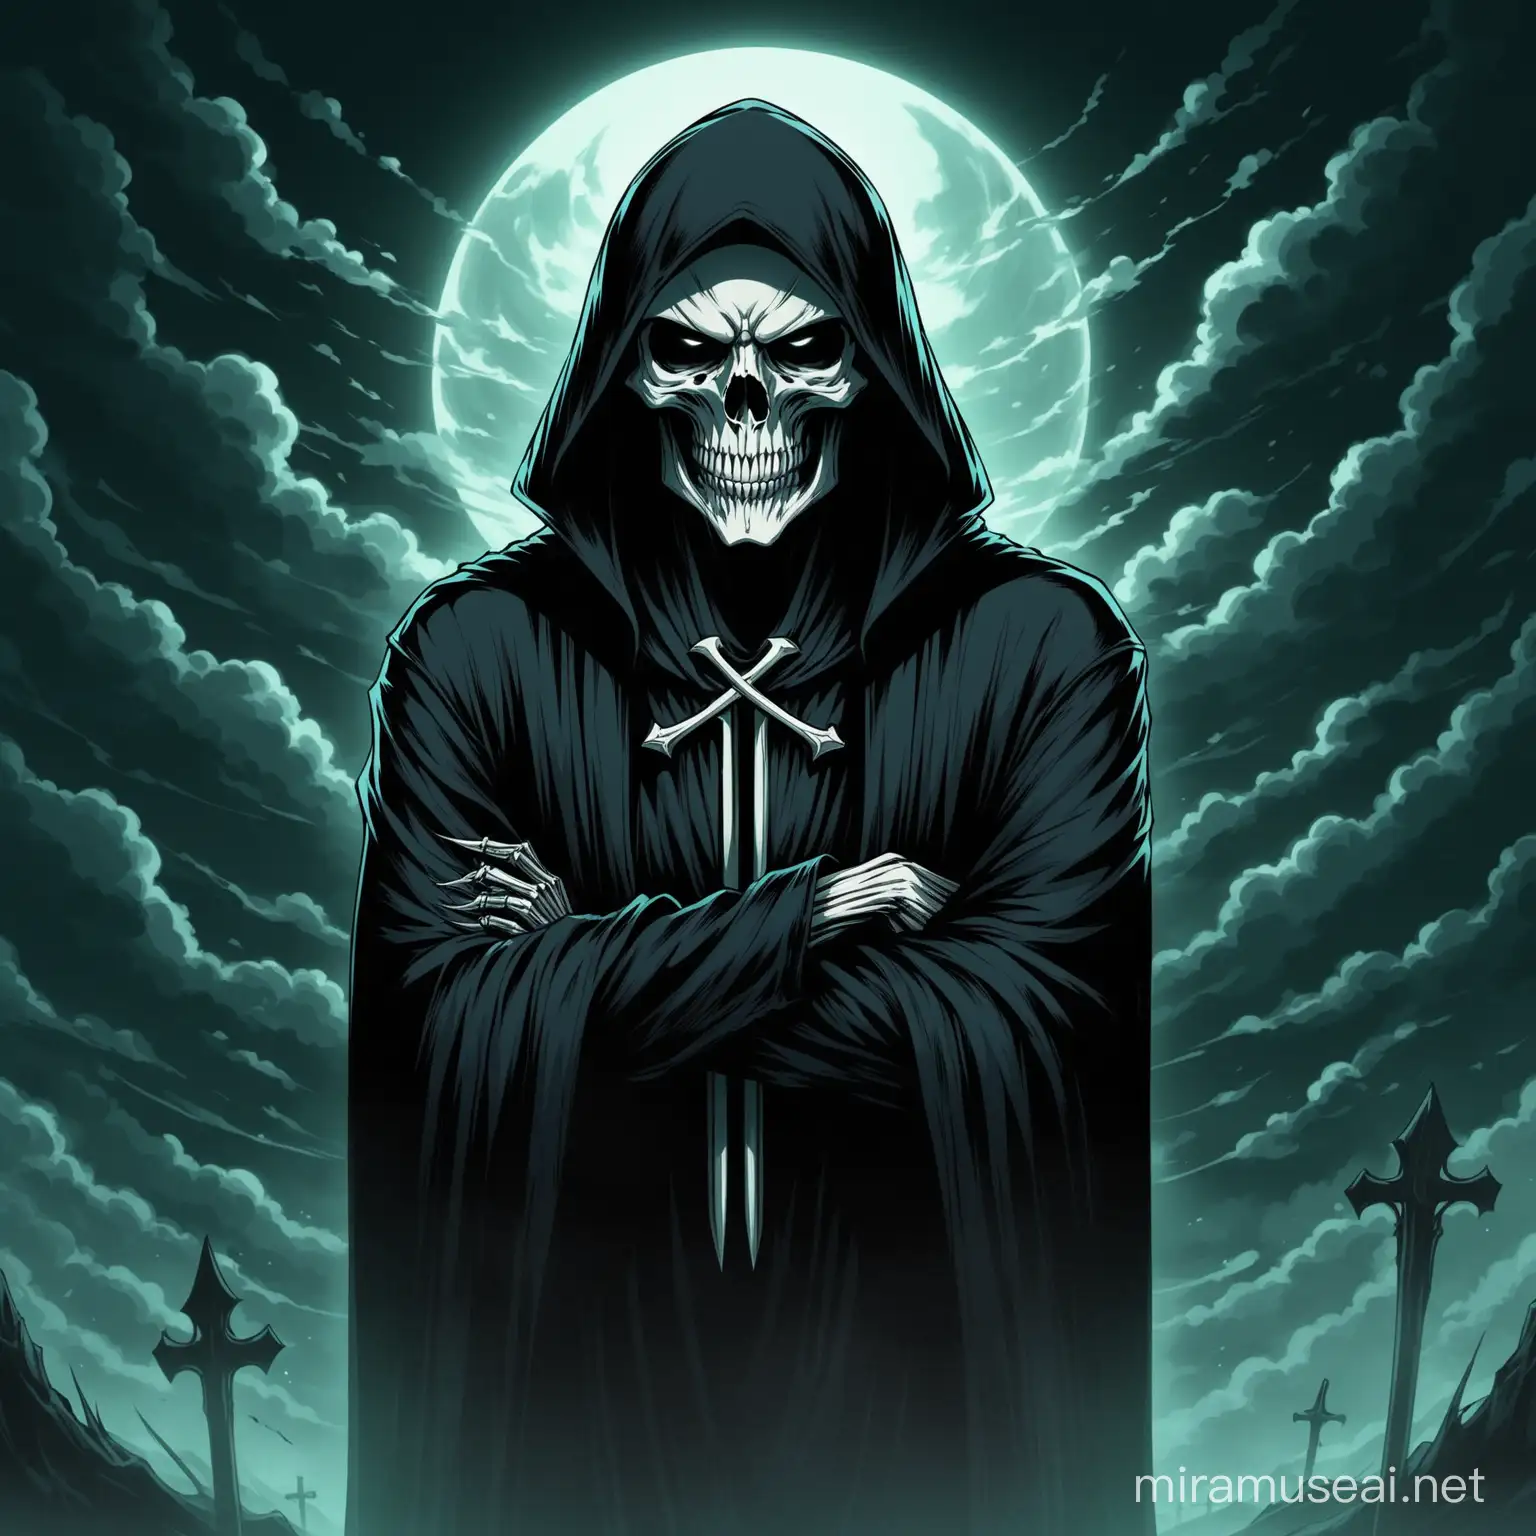 Grim Reaper with Crossed Arms in Foreboding Stance